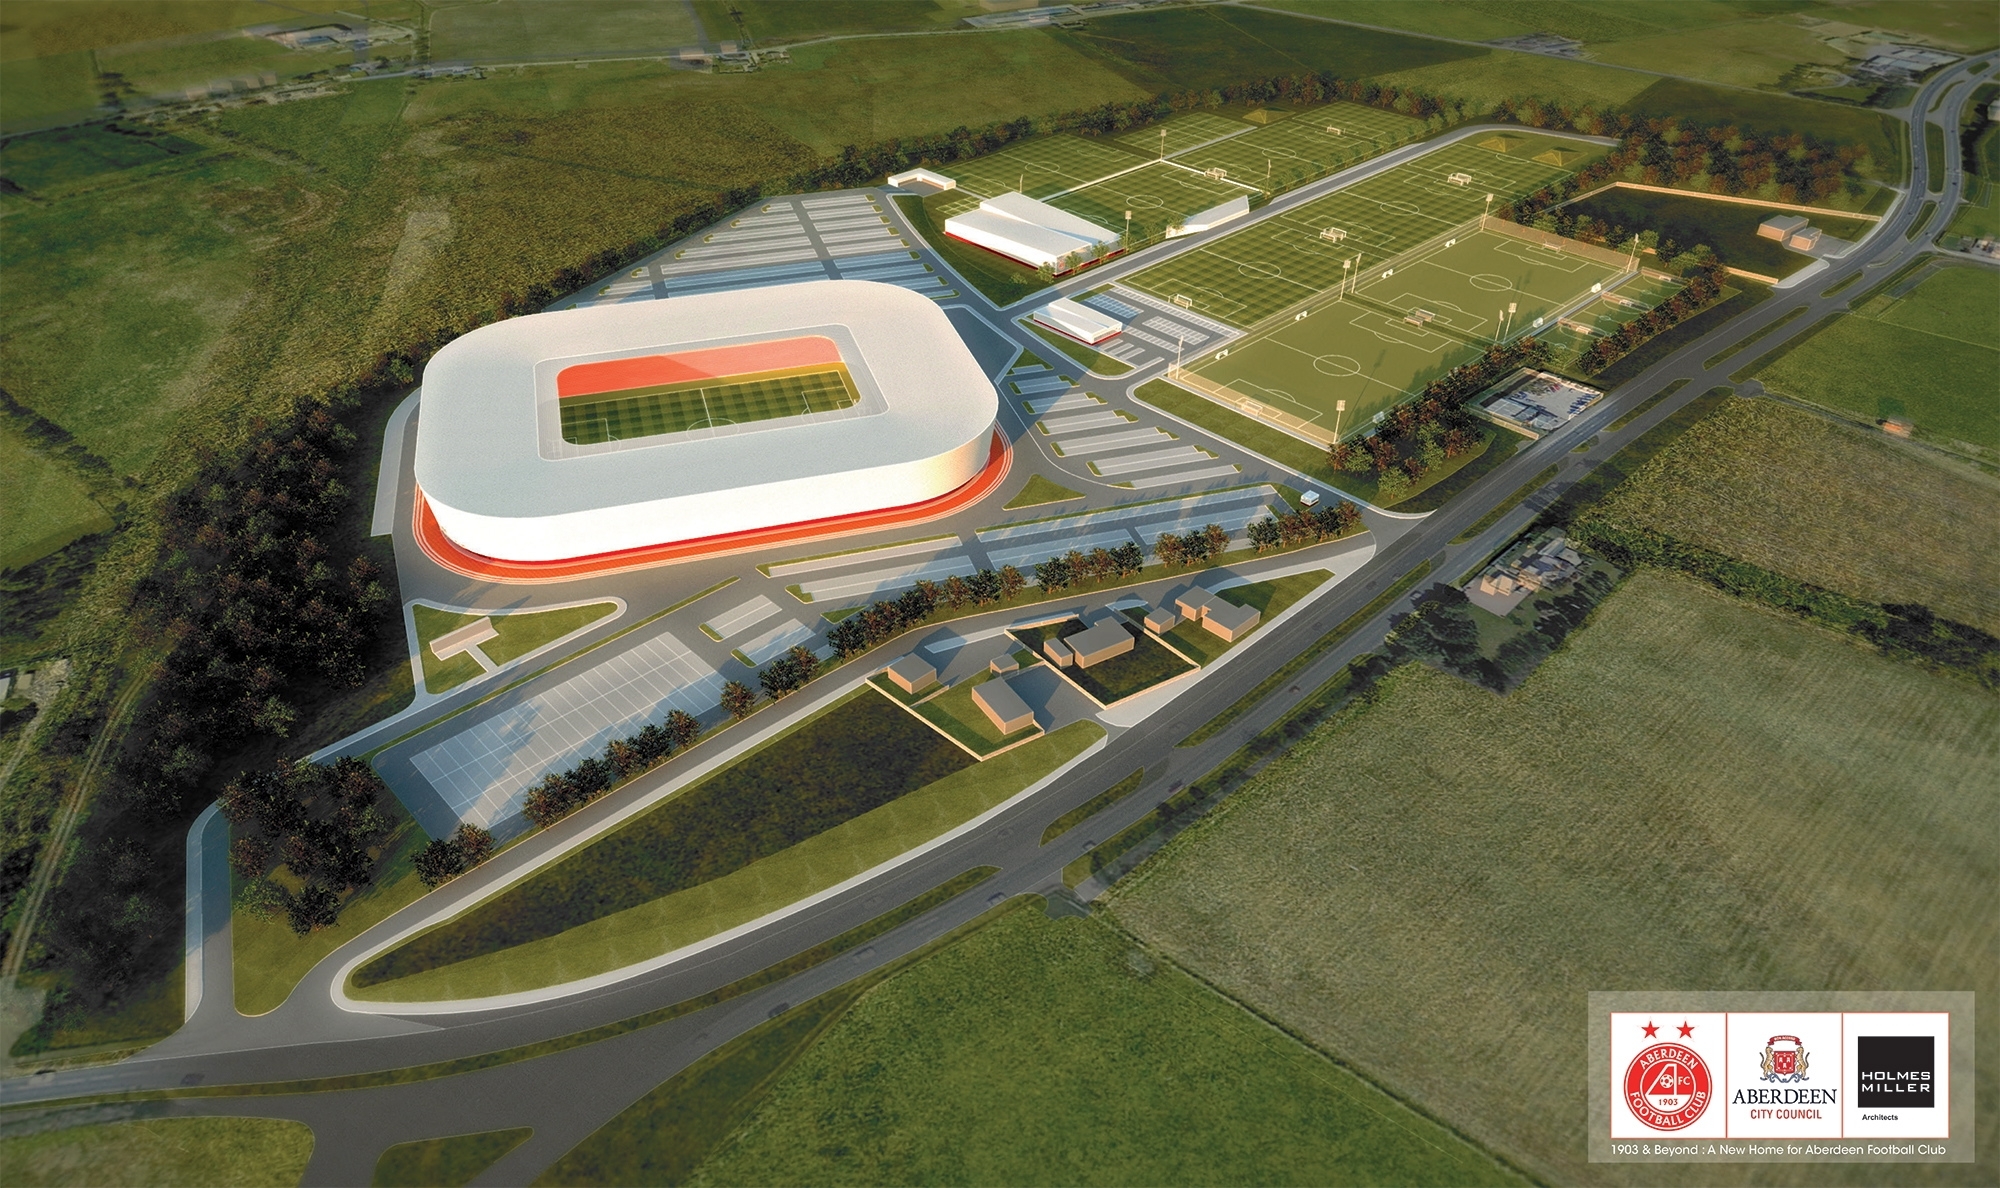 3d Perspective of the new Dons stadium planned between Kingswells and Westhill.